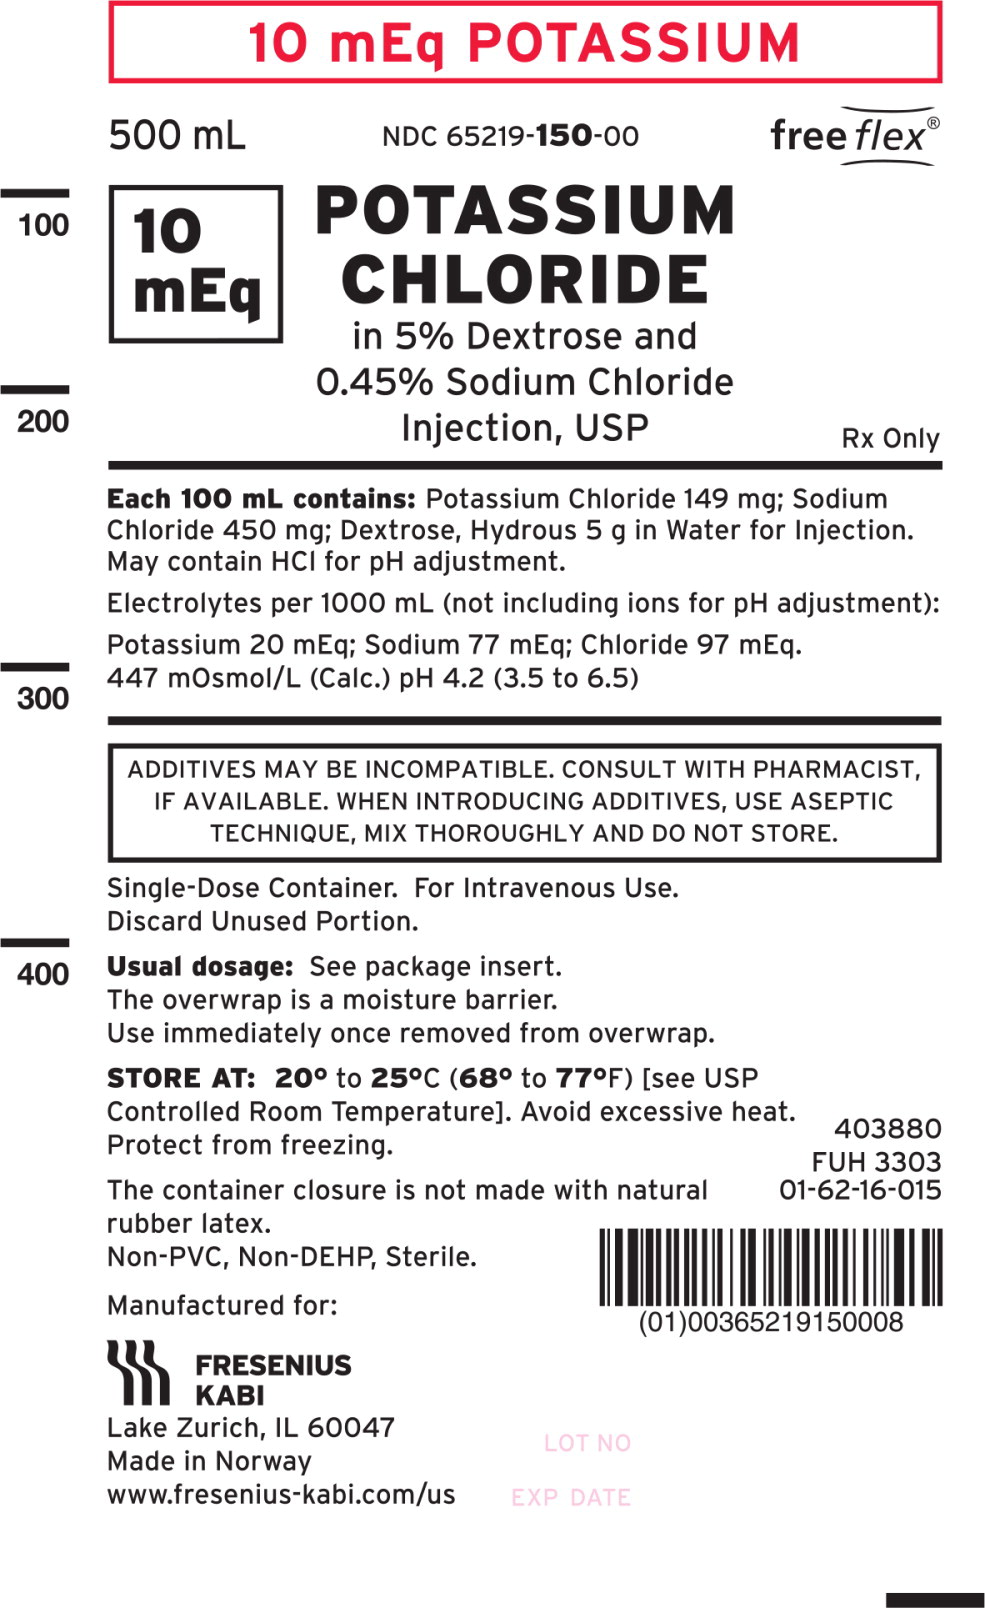 PACKAGE LABEL - PRINCIPAL DISPLAY – 10 mEq POTASSIUM CHLORIDE in 5% Dextrose and 0.45% Sodium Chloride Injection, USP 500 mL Bag Label
